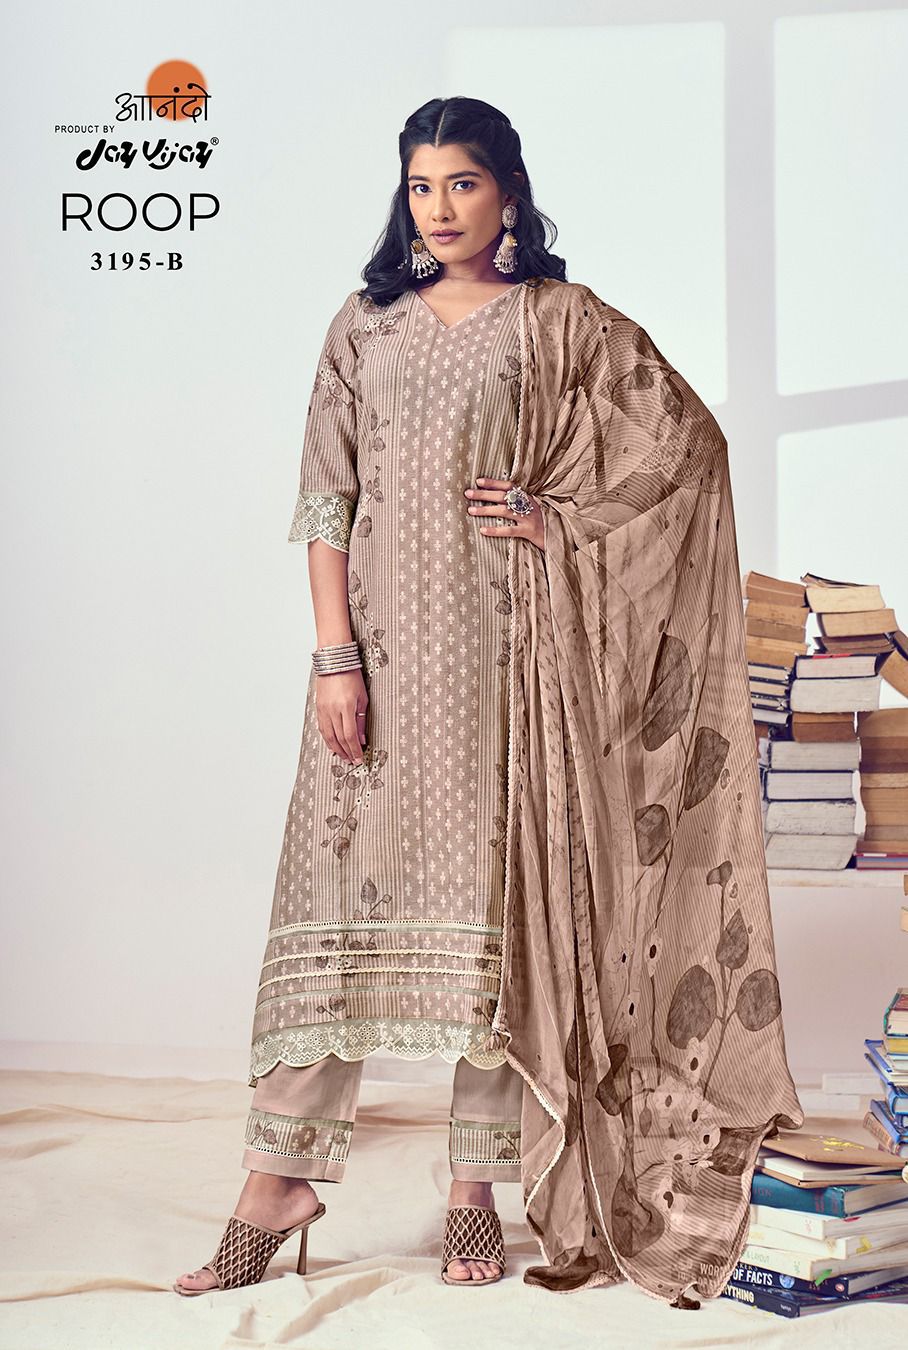 Roop 3195 Jay Vijay Linen Pant Style Suits Supplier India